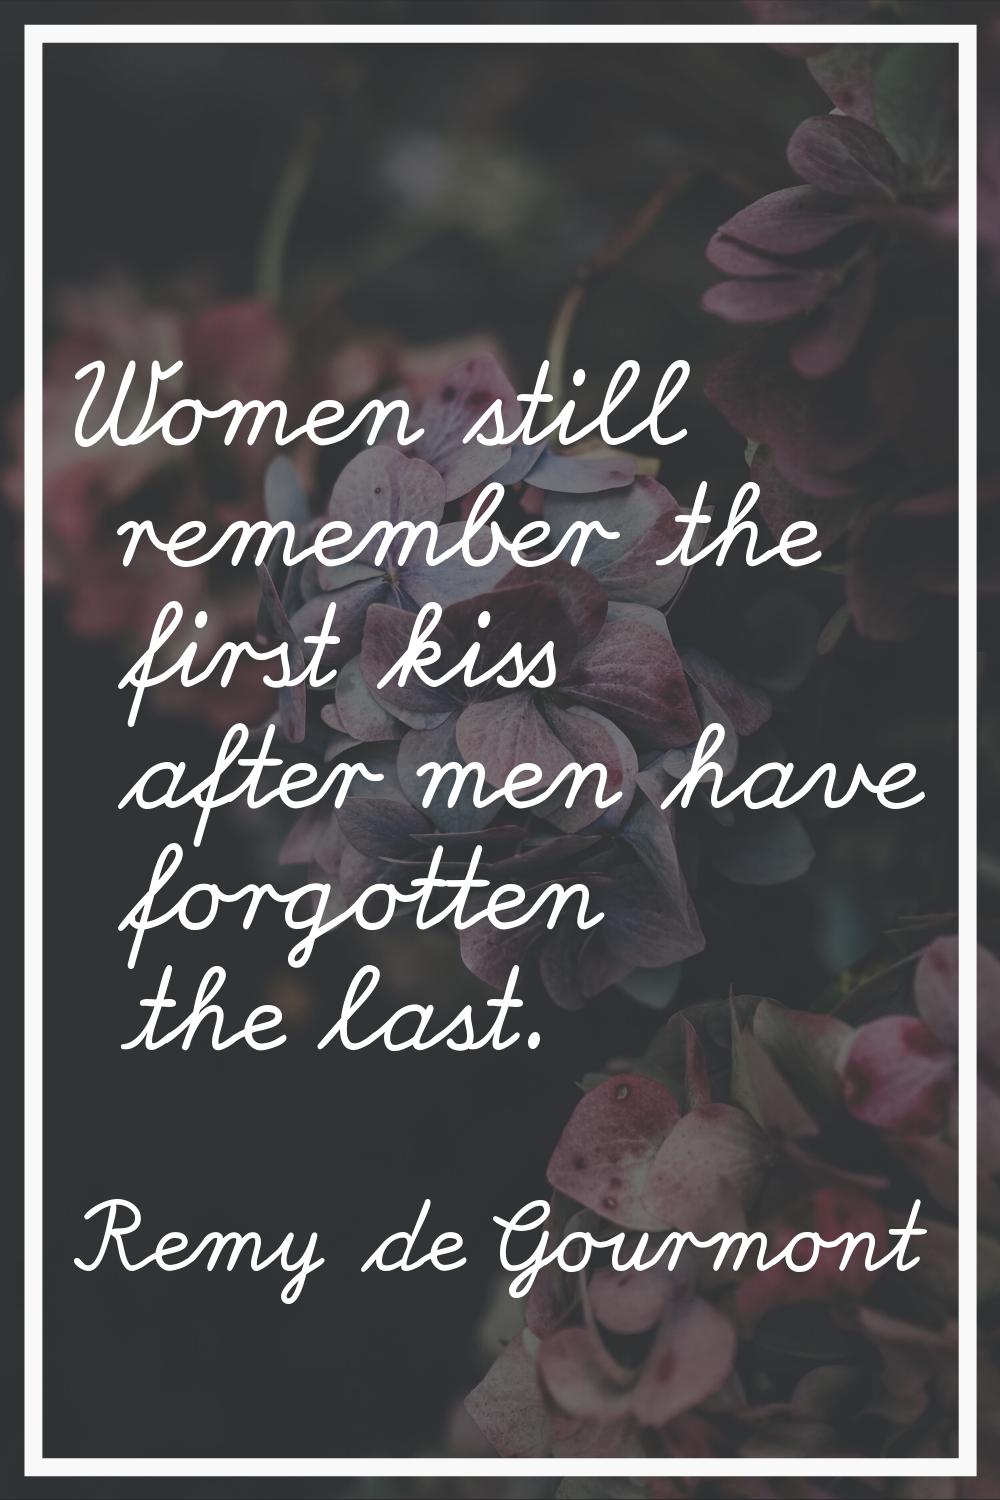 Women still remember the first kiss after men have forgotten the last.